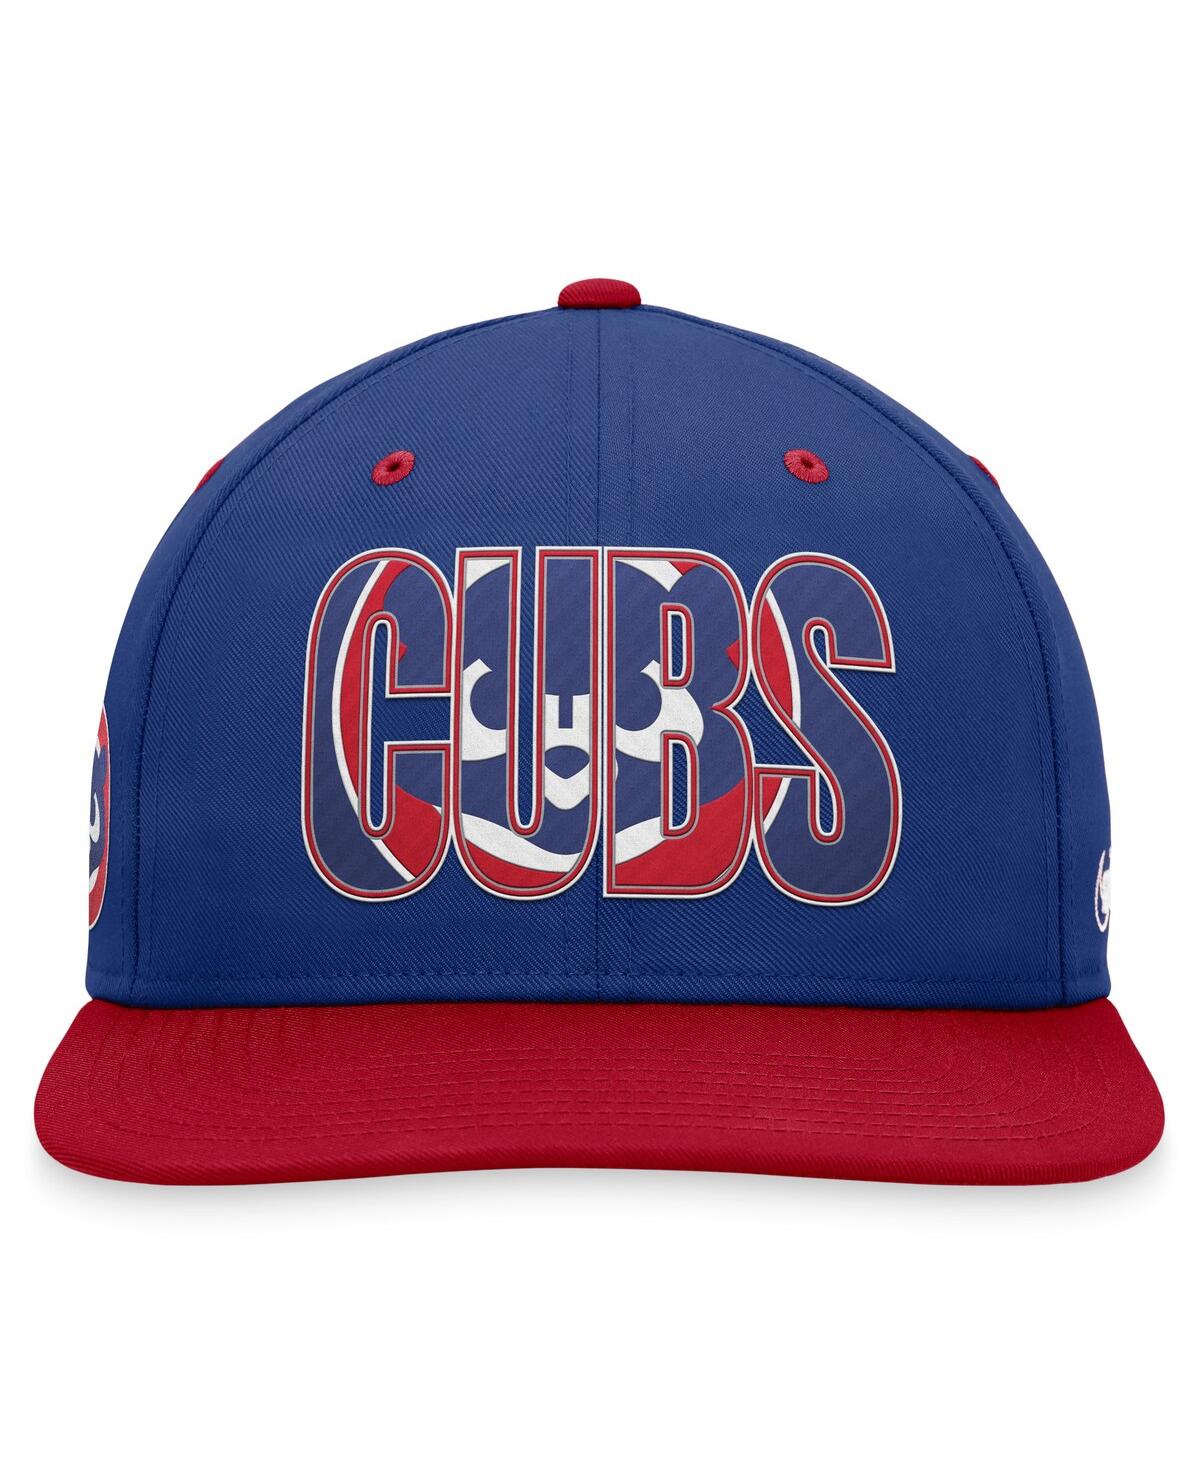 Shop Nike Men's  Royal Chicago Cubs Cooperstown Collection Pro Snapback Hat